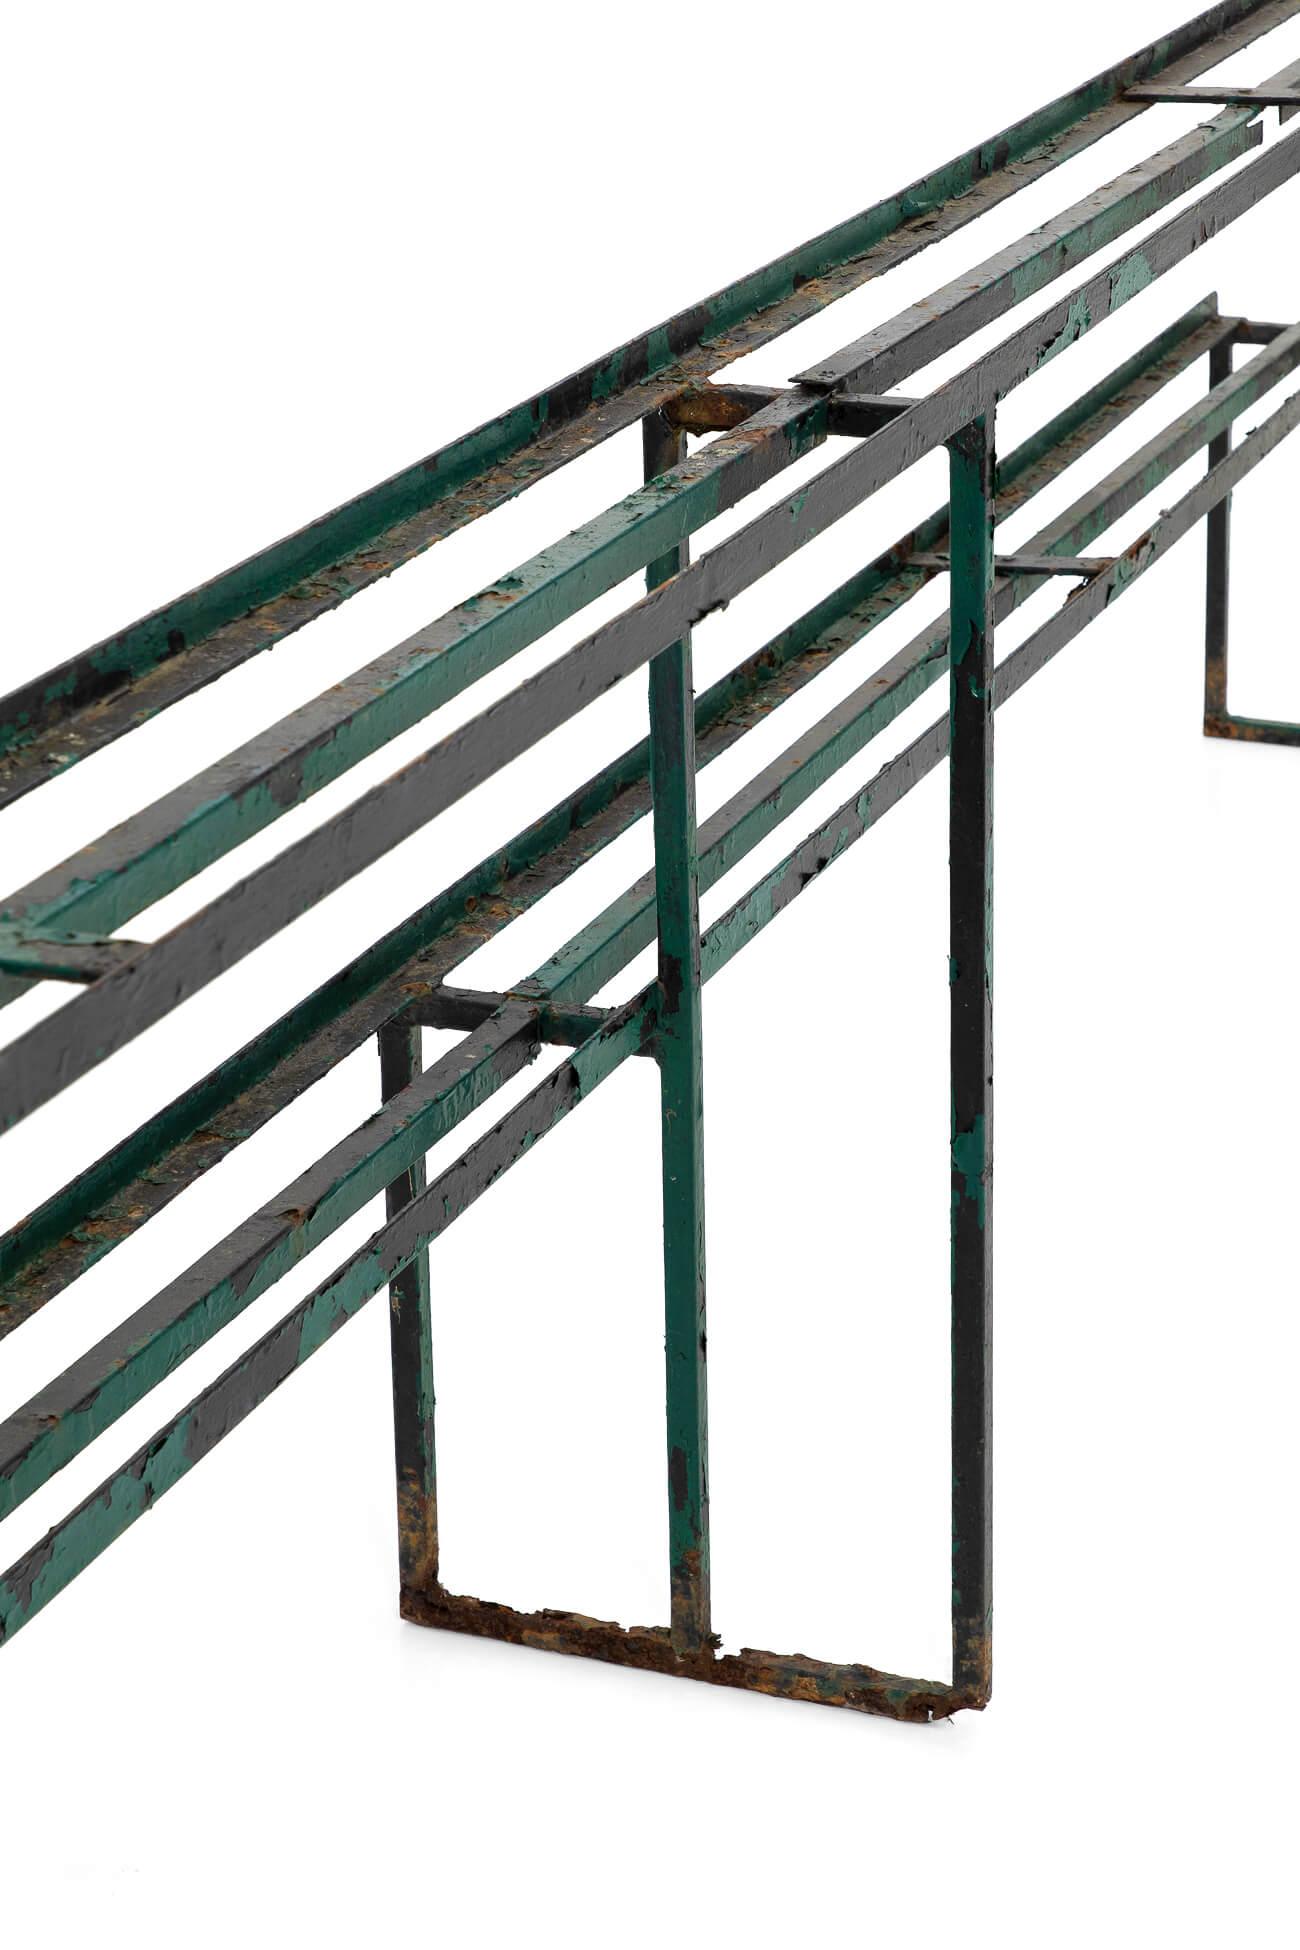 A commanding Parisian two tier florist rack in original condition. In iron strap metal at over twelve feet in length. Decorative and practical in a wonderful flaky green paint. 
France, circa 1910.

Additional information:
H 85 cm (H 33.4